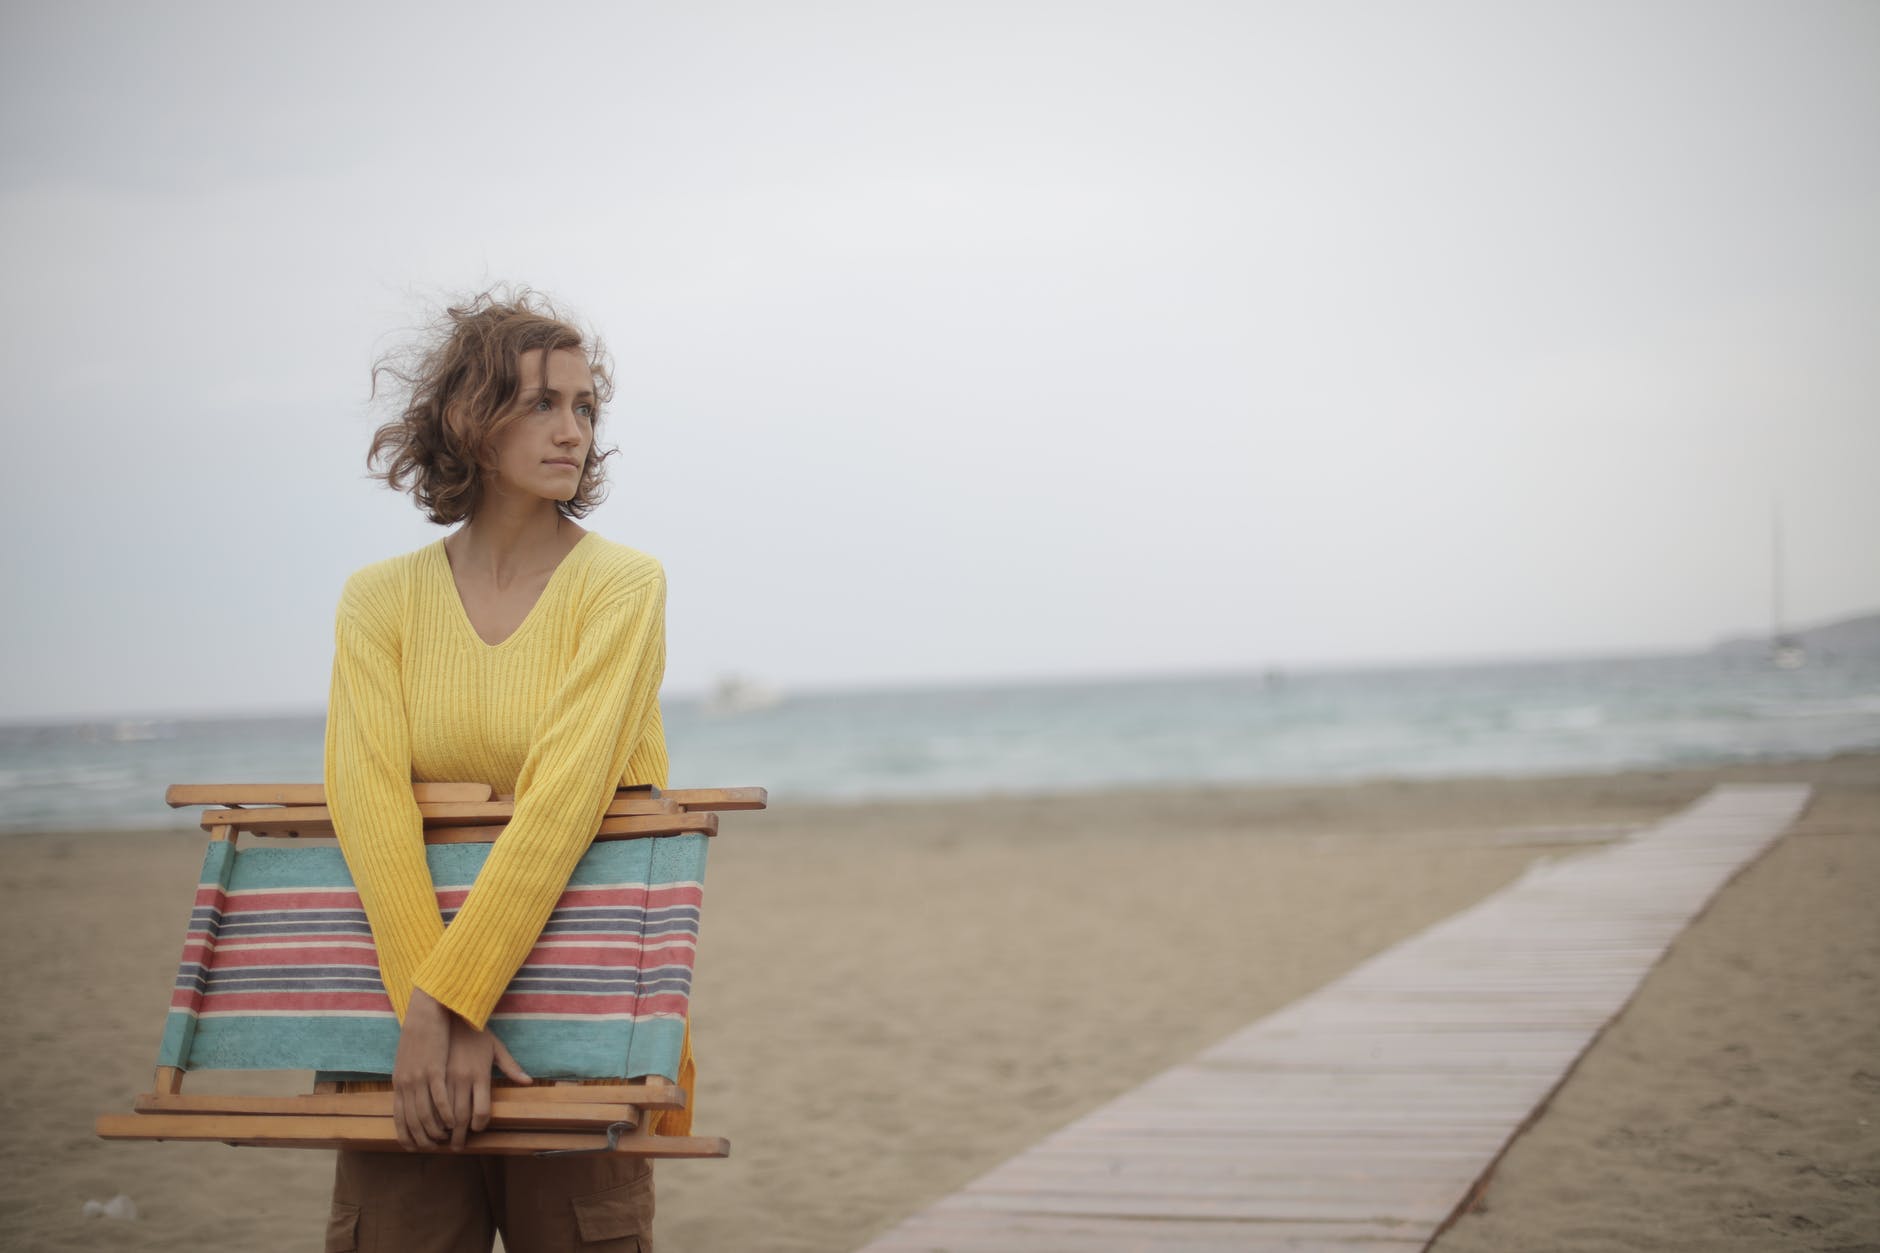 photo of woman in yellow long sleeve shirt standing at the beach carrying wooden folding beach chair body insecurity can affect everyone